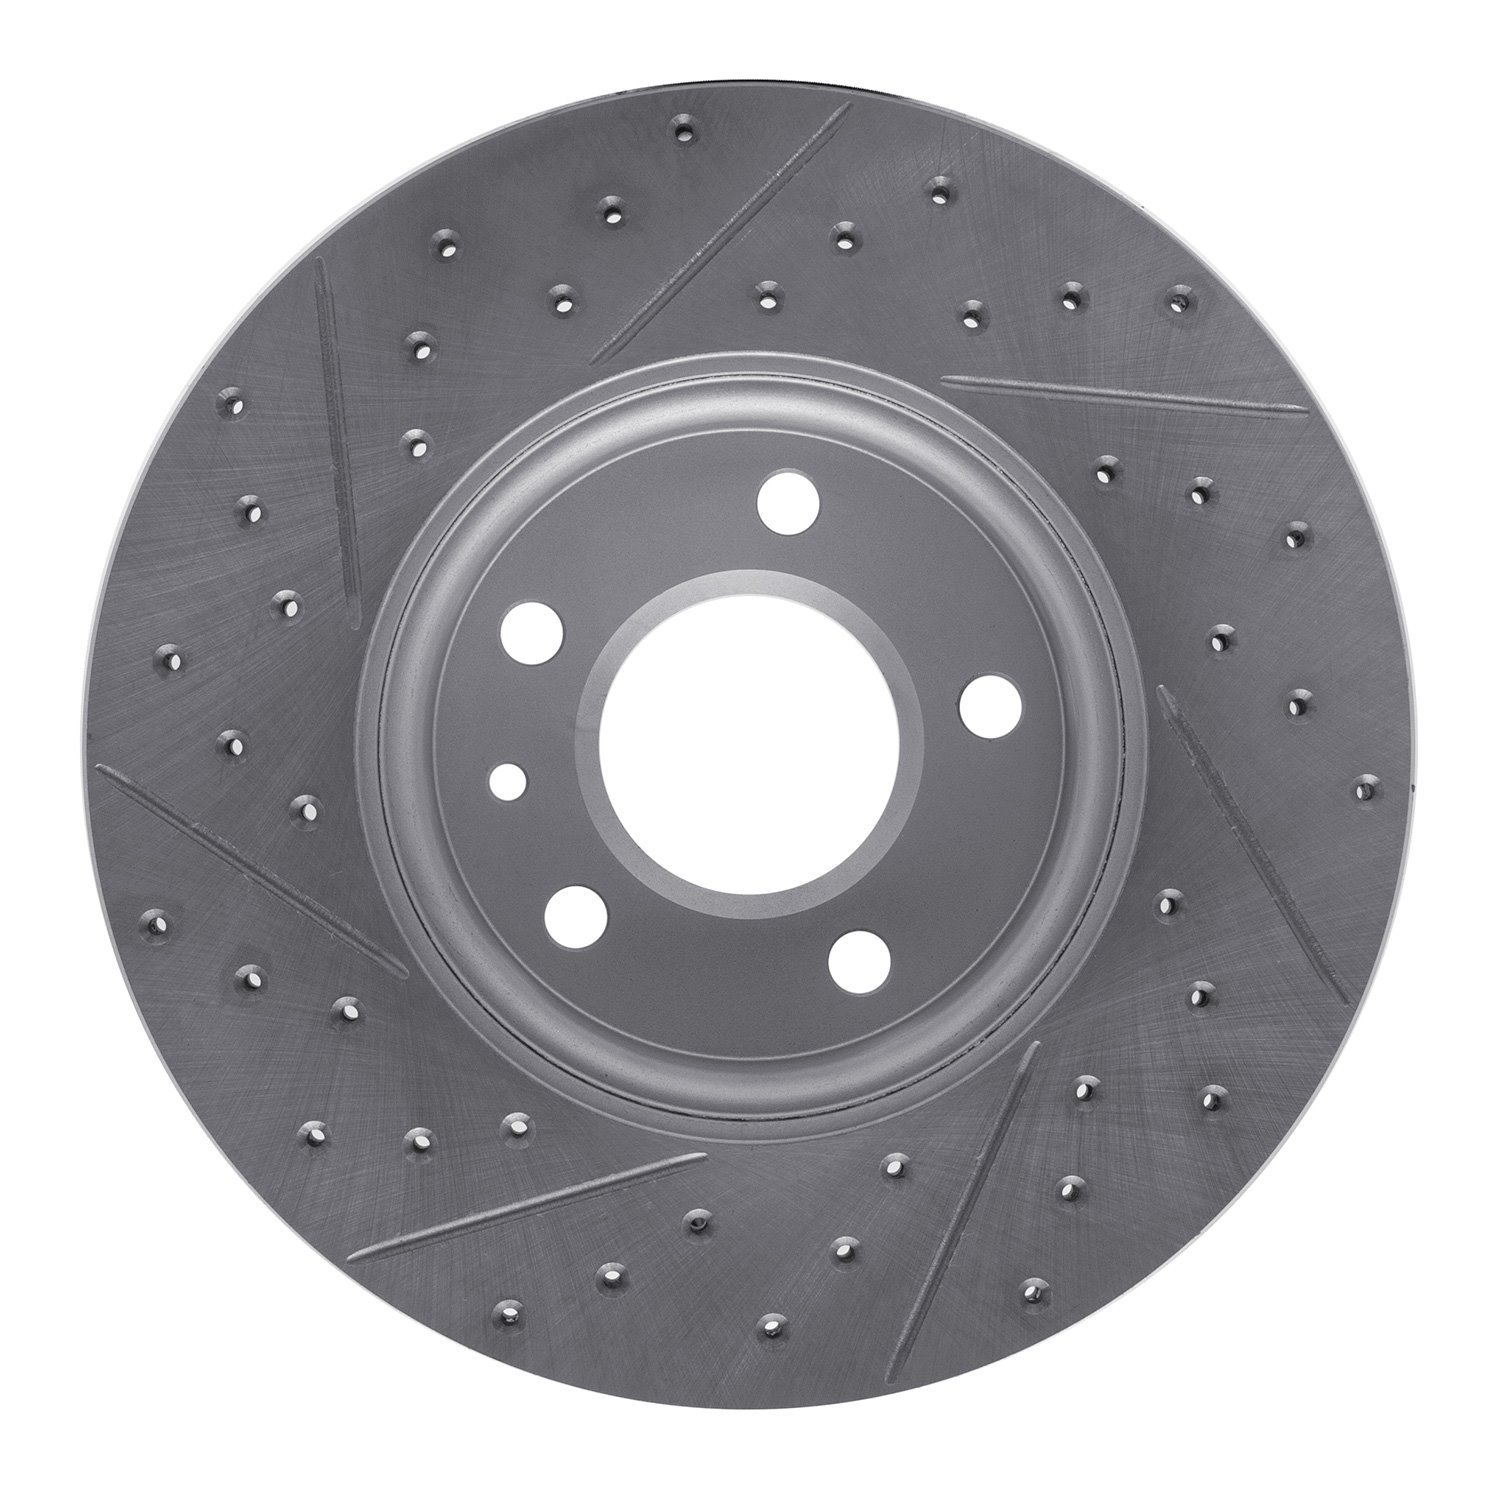 830-46033R Geoperformance Drilled/Slotted Brake Rotor, Fits Select GM, Position: Front Right